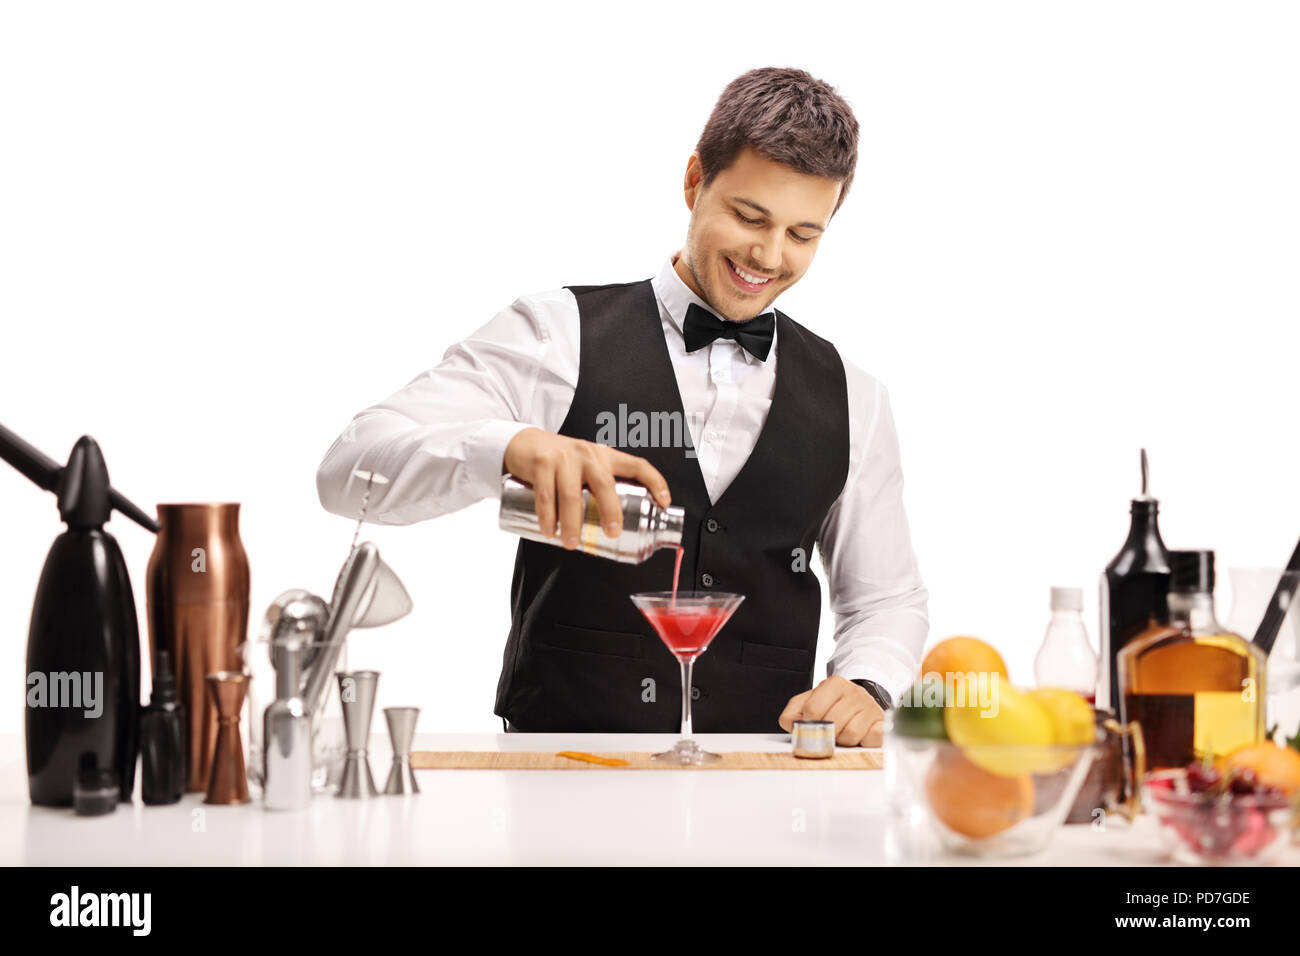 Barman pouring his signature cocktail in a glass isolated on white background Stock Photo